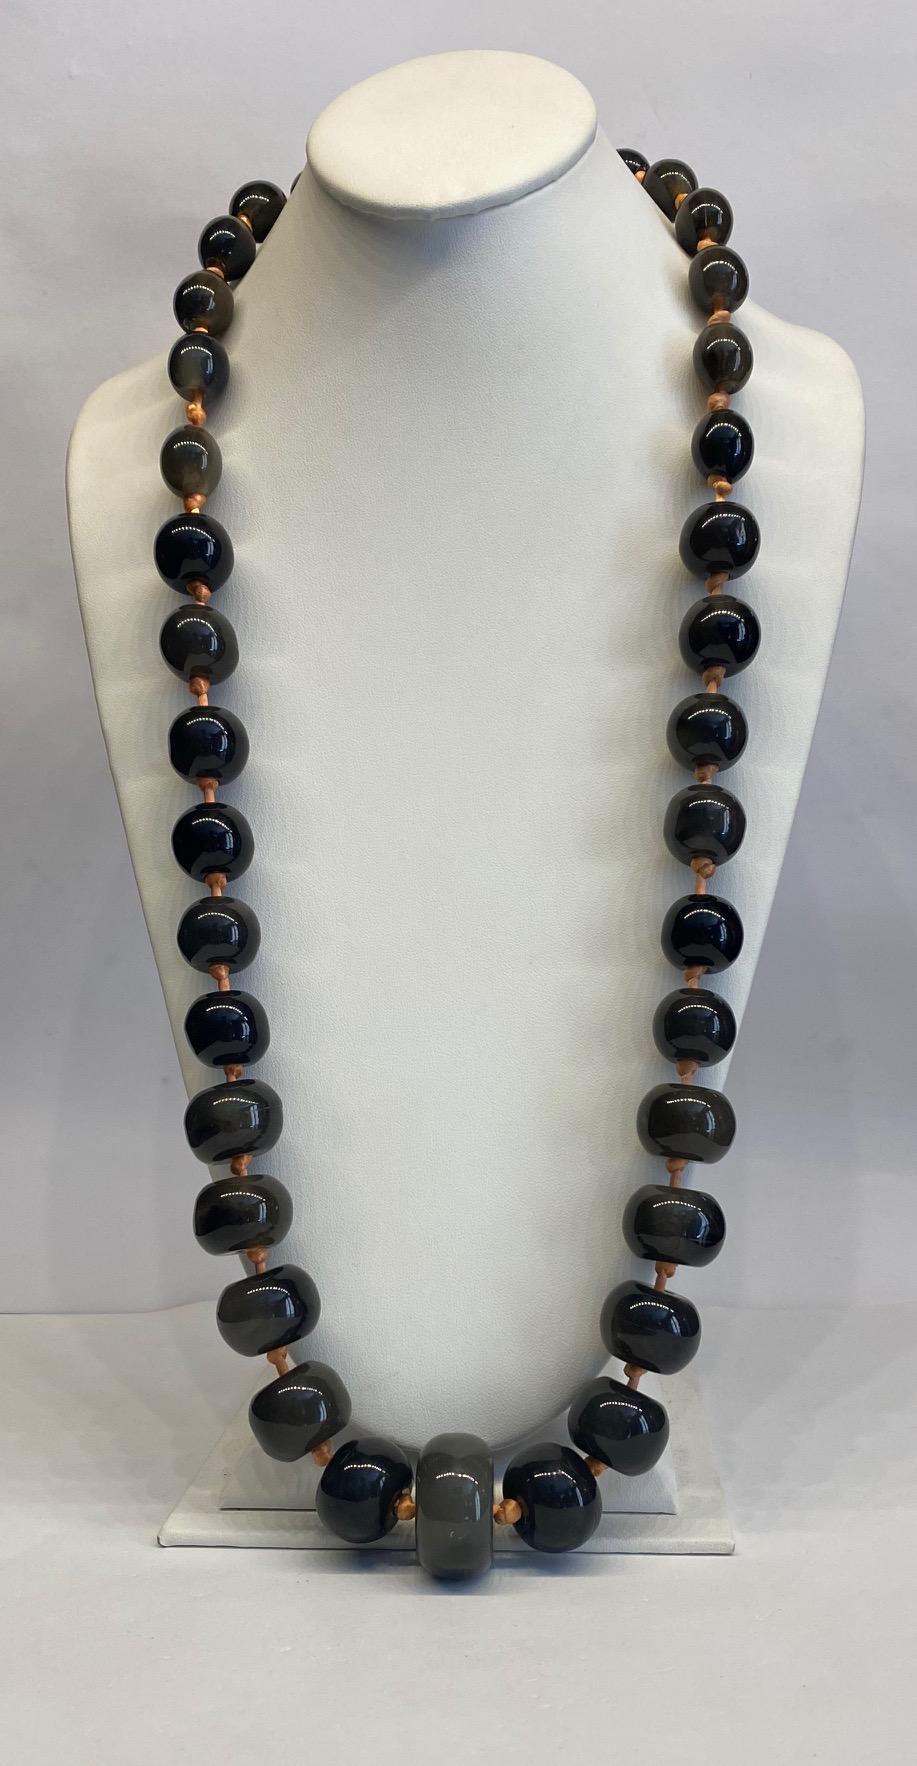 A beautifully made graduated resin bead necklace from the 1980s by Valentino Garivani. The beads are a translucent grey resin irregular in shape and color. Some are oval, some round and the largest bottom bead is a wide flattened disk shape. Each